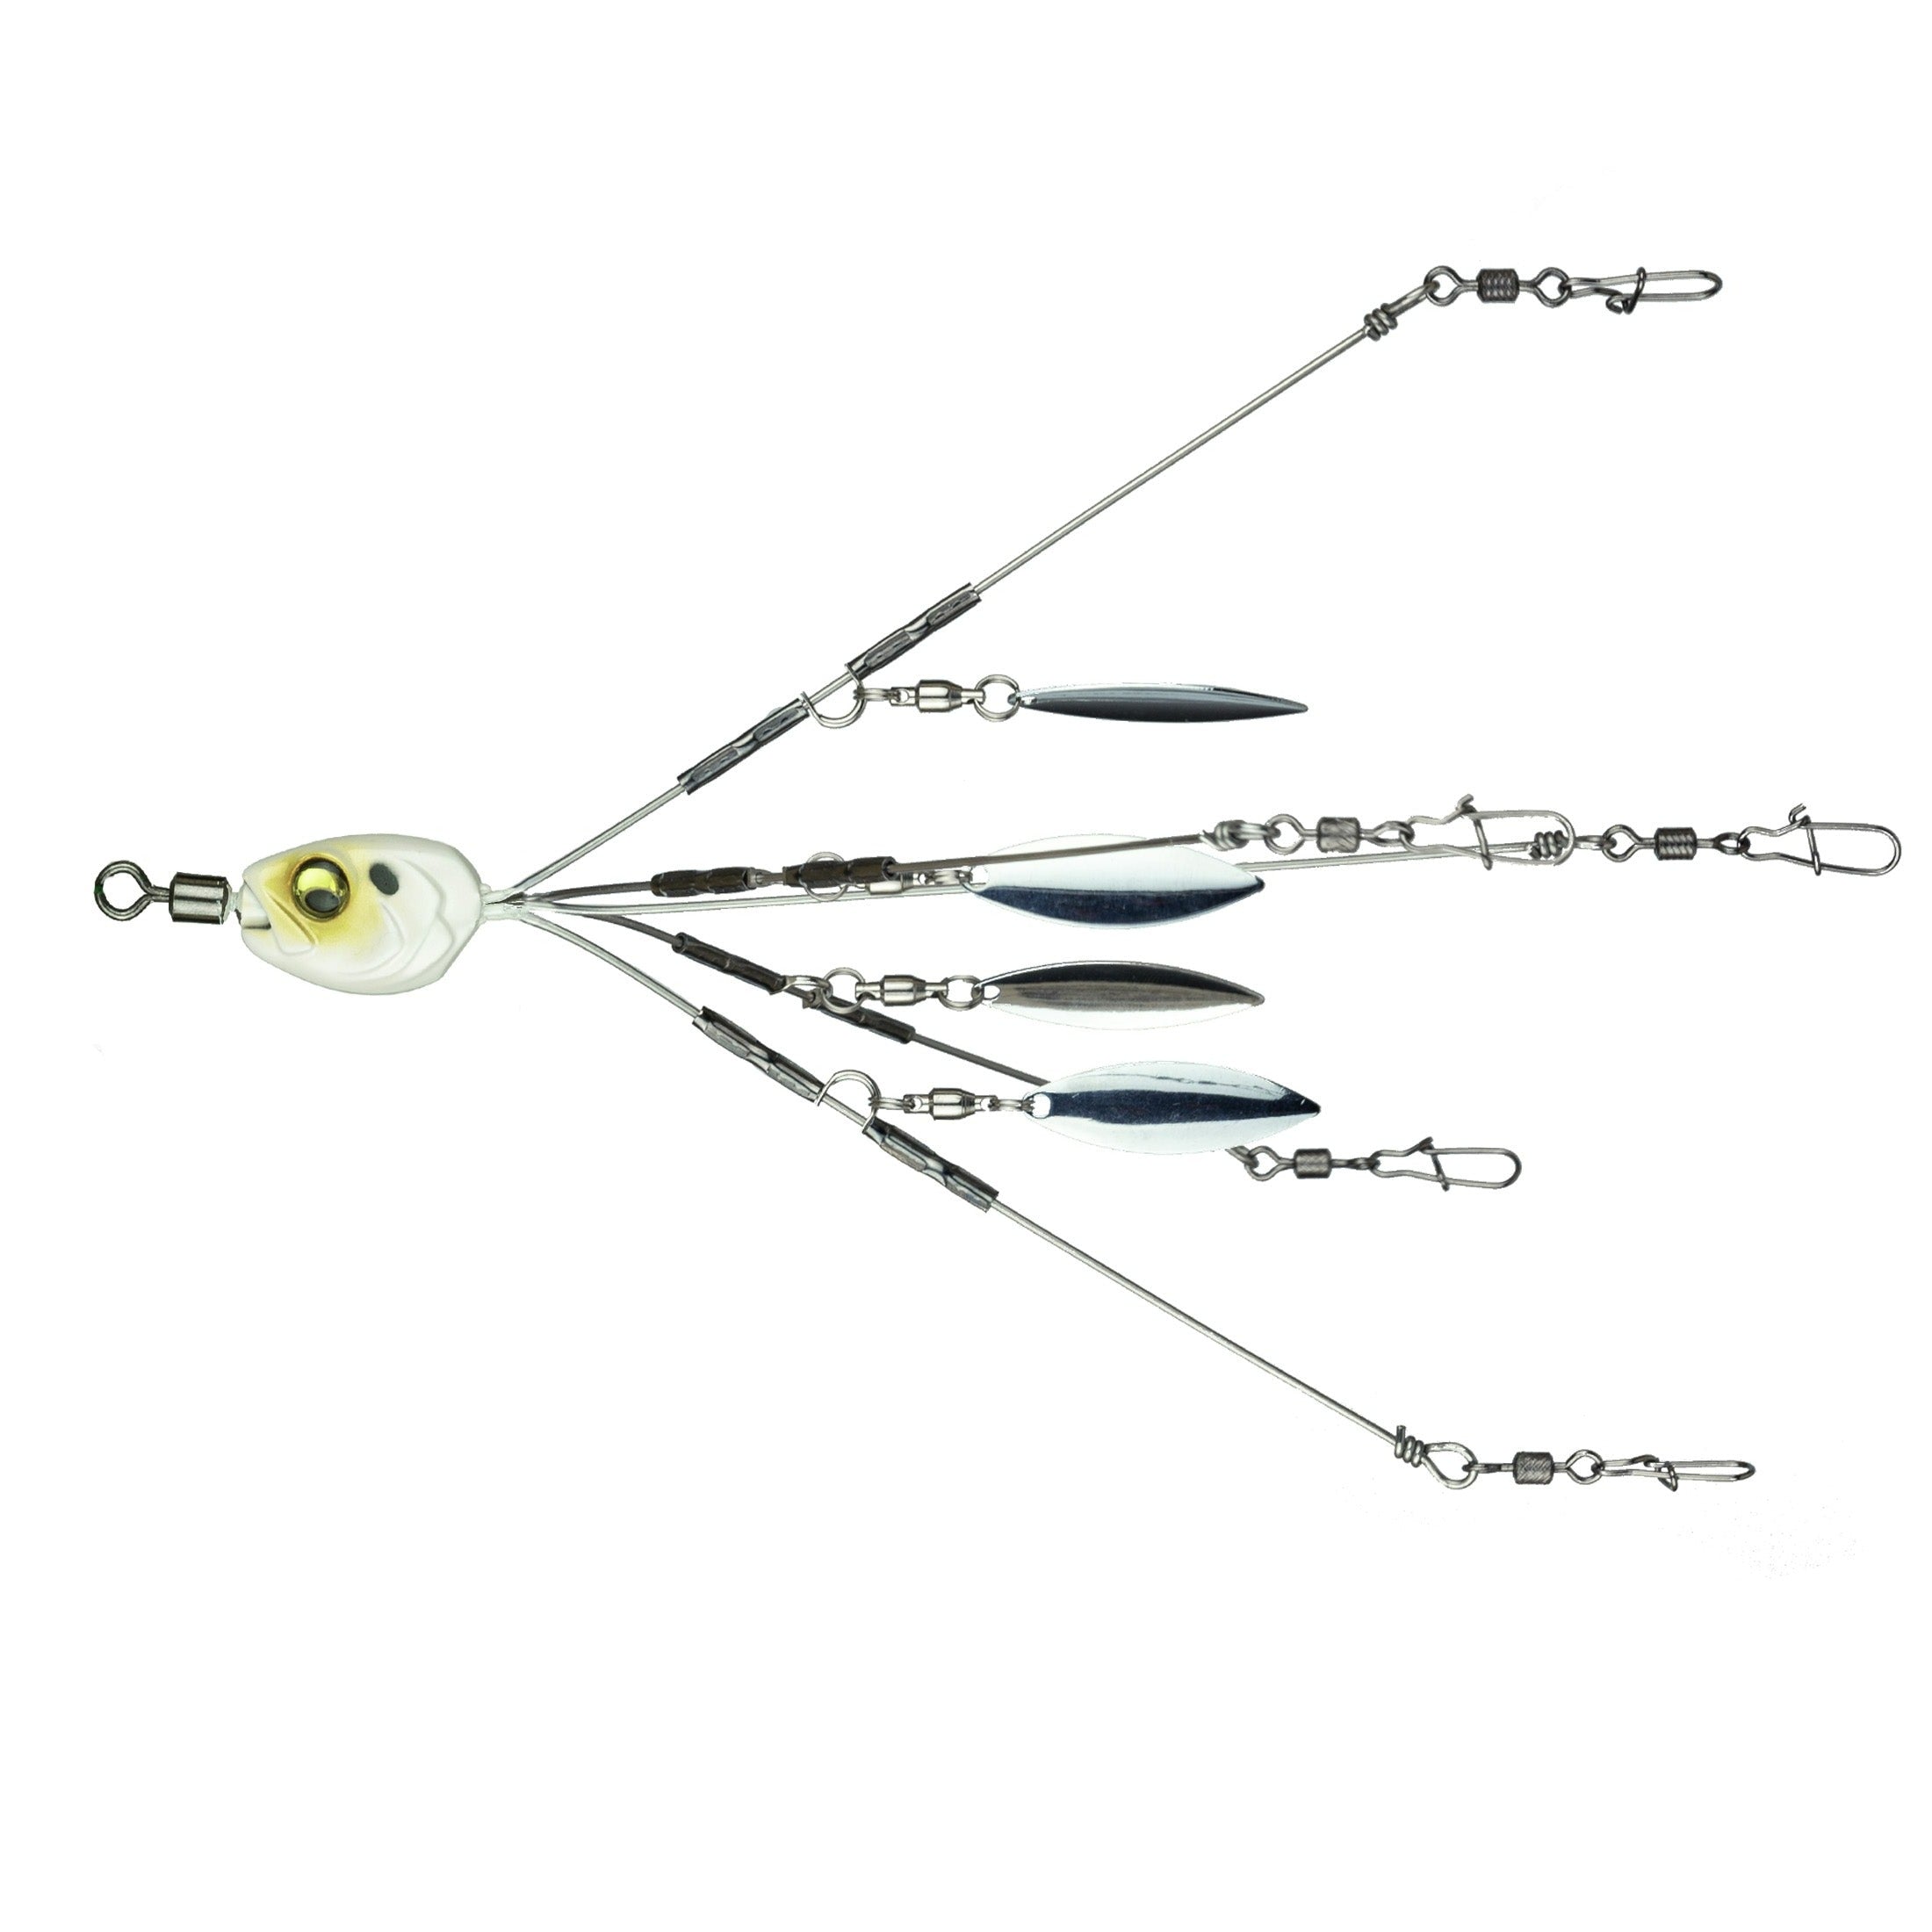 XhuangTech Alabama Rig Baits, Umbrella Fishing Lure Rig Kit with Pre-Rigged  Soft Swimbaits with Ultra-Sharp Hooks, Trolling Umbrella Rigs for Stripers